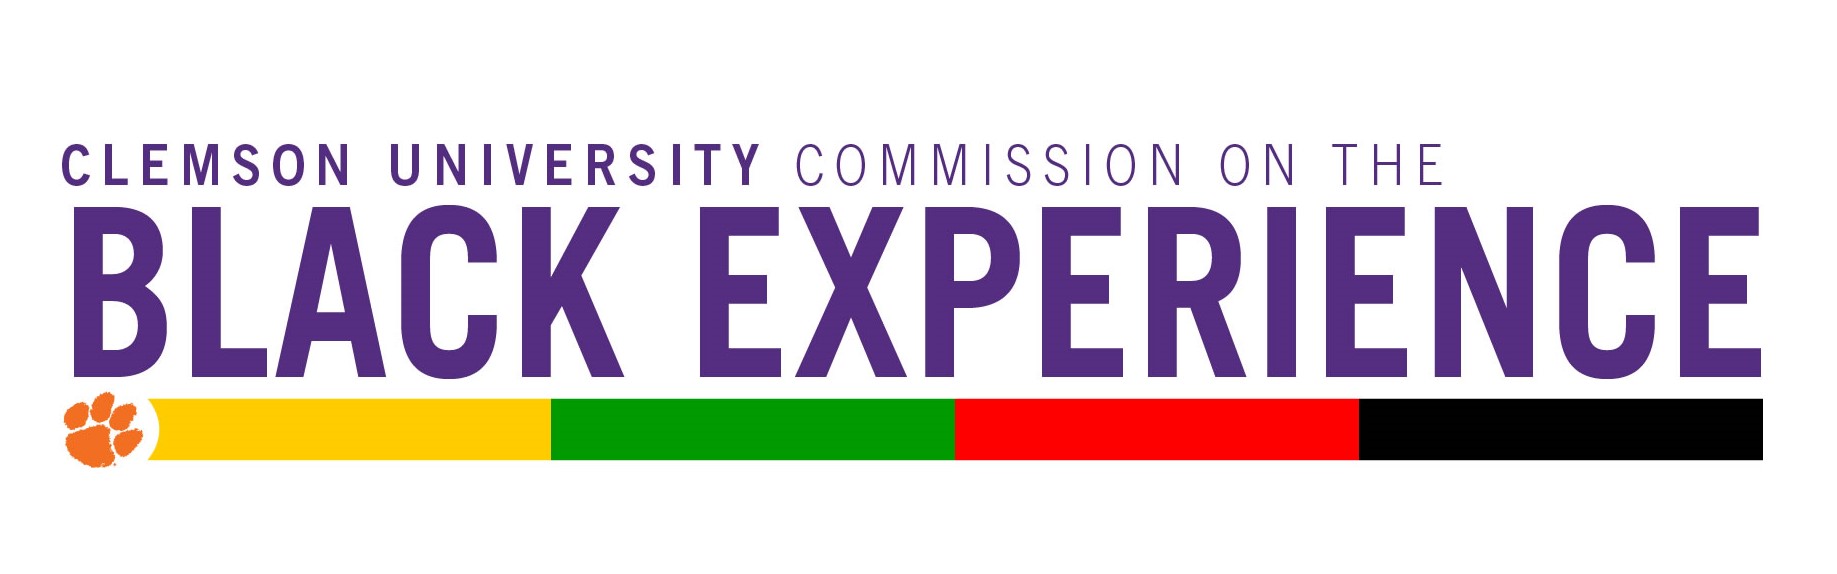 Clemson University Commission on the Black Experience